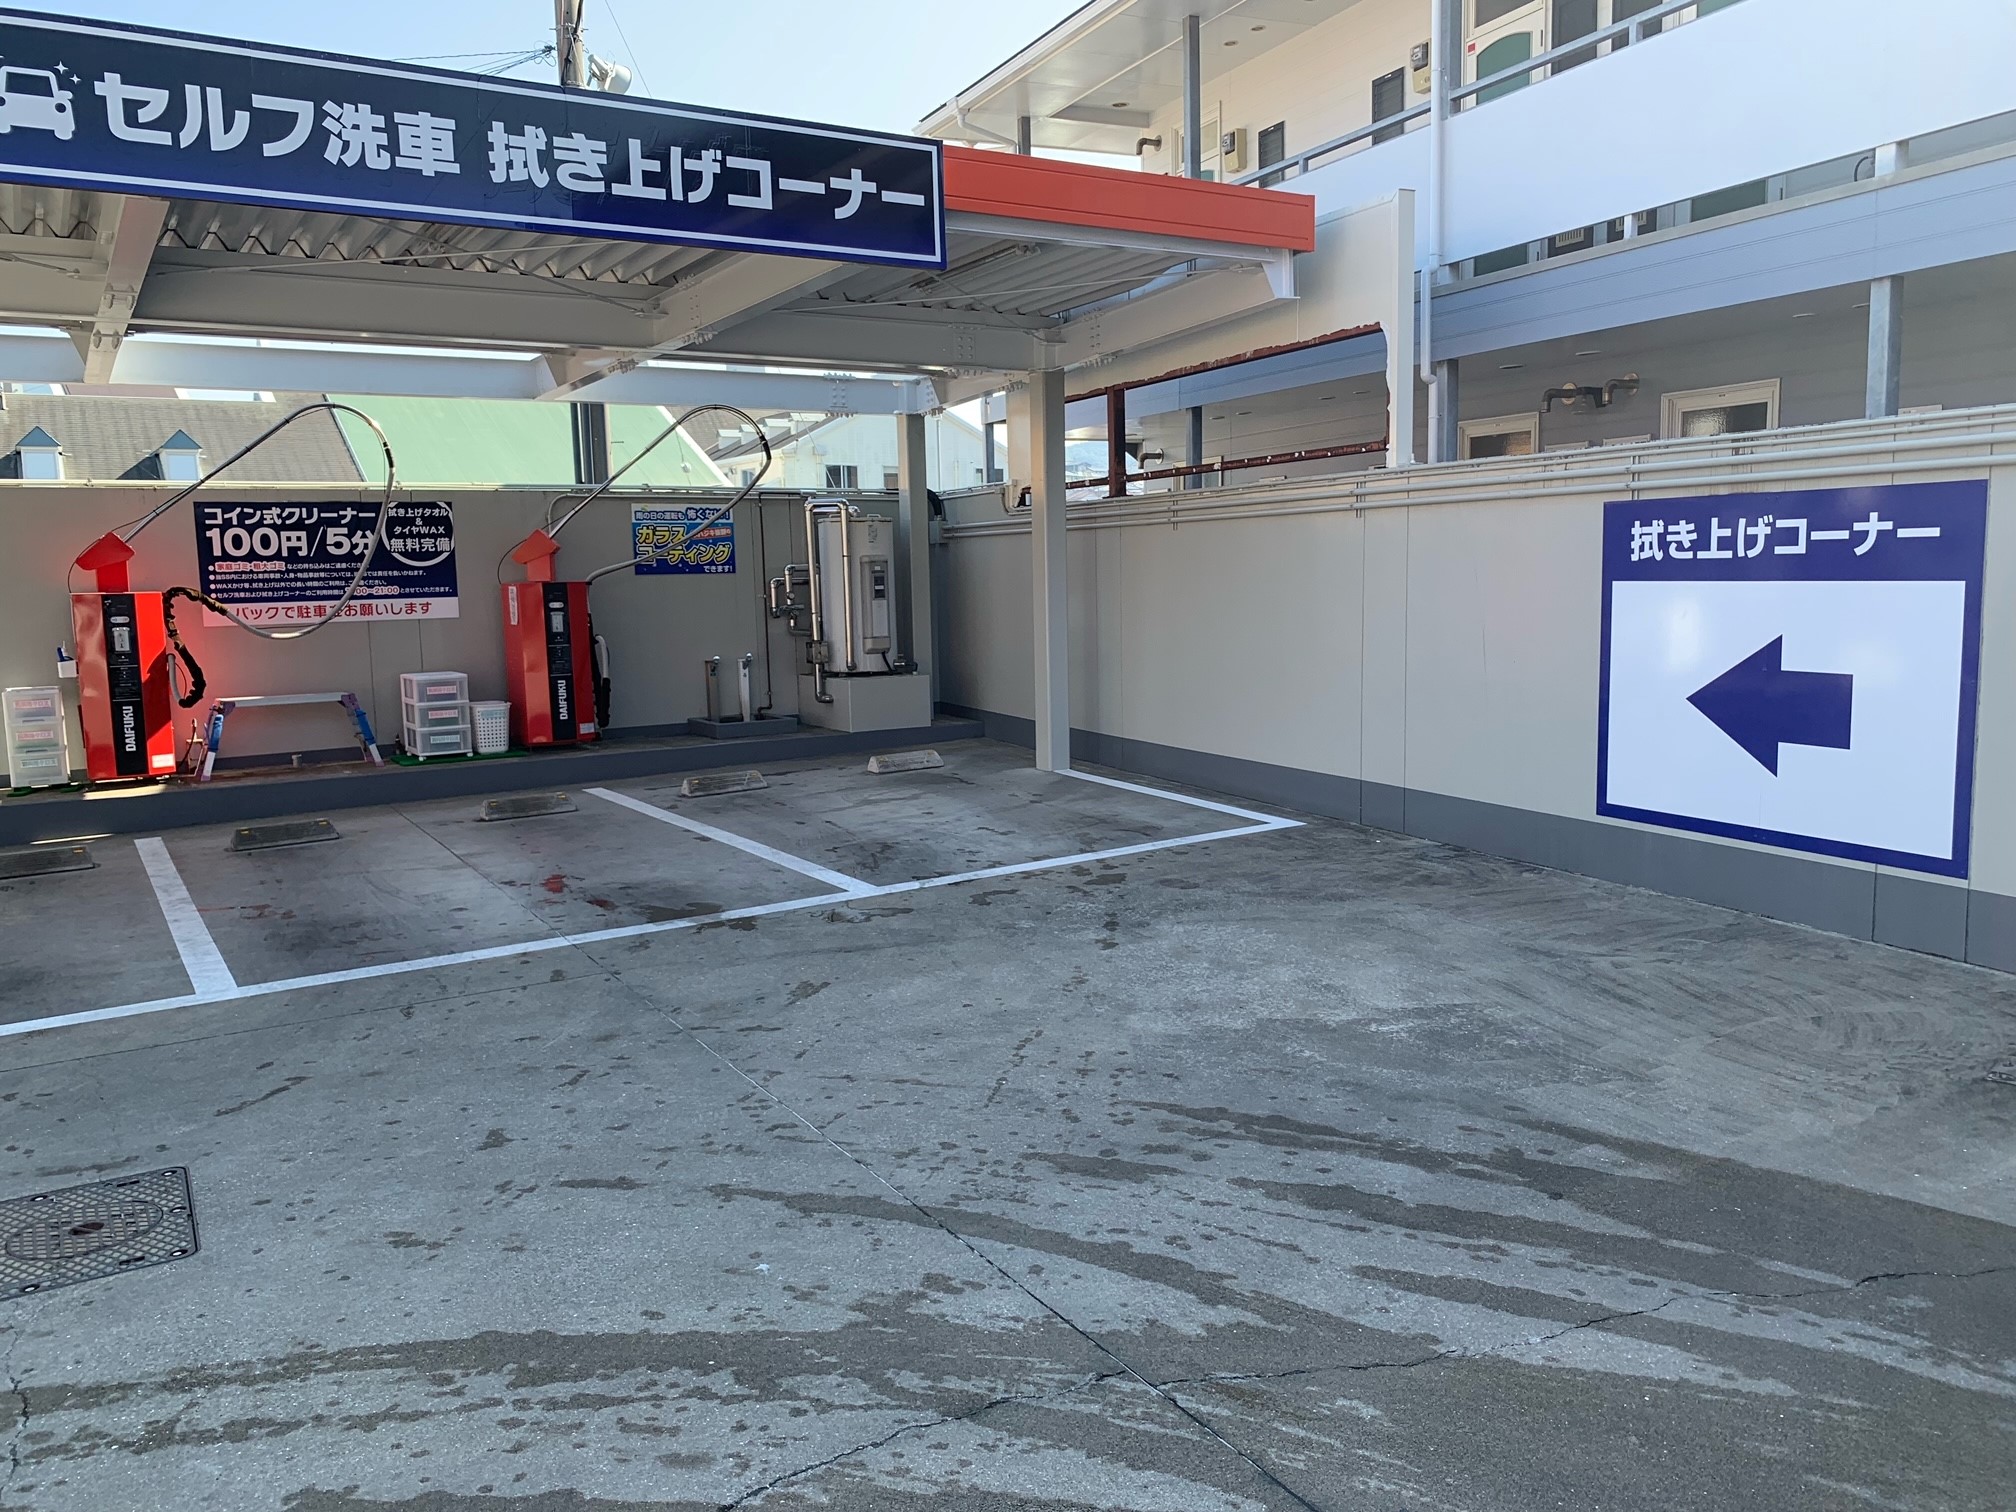 Images ENEOS Dr.Driveセルフ小川町店(ENEOSフロンティア)